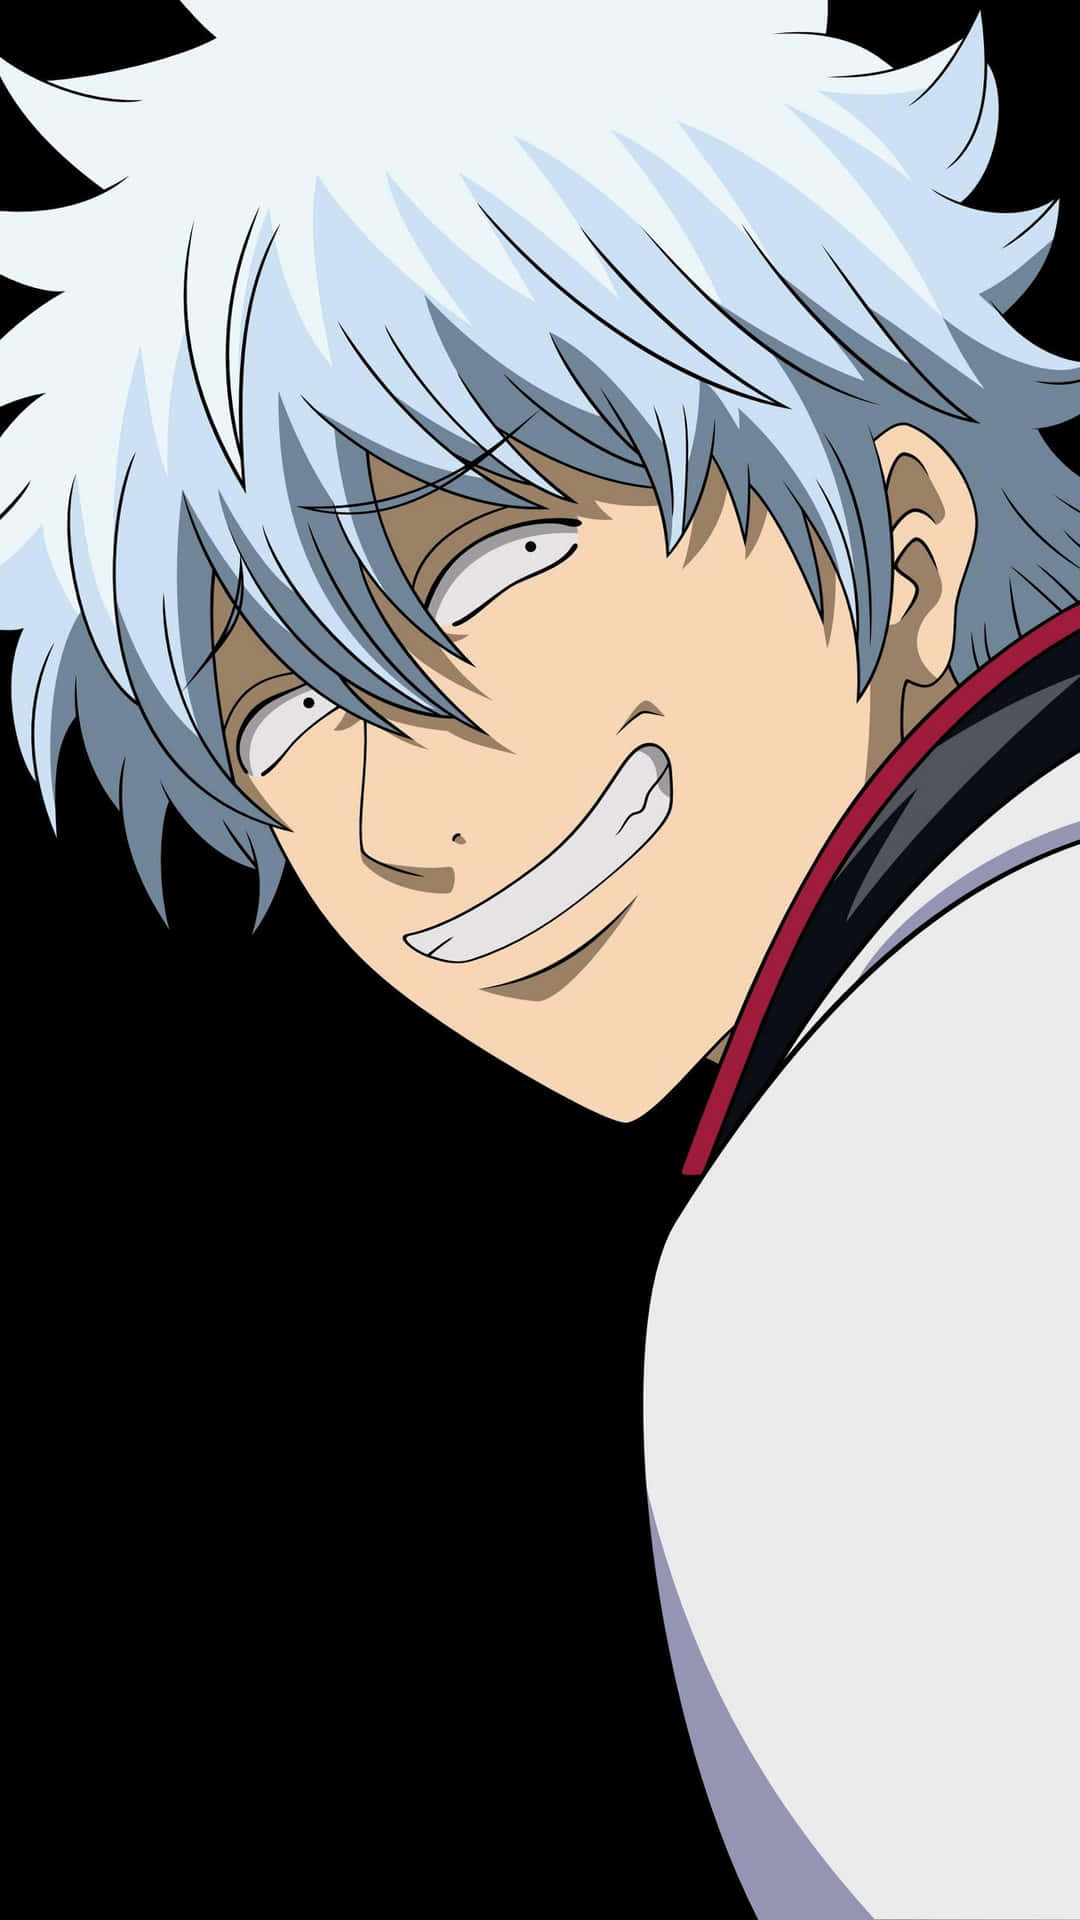 Watch Gintama with HD Quality Wallpaper